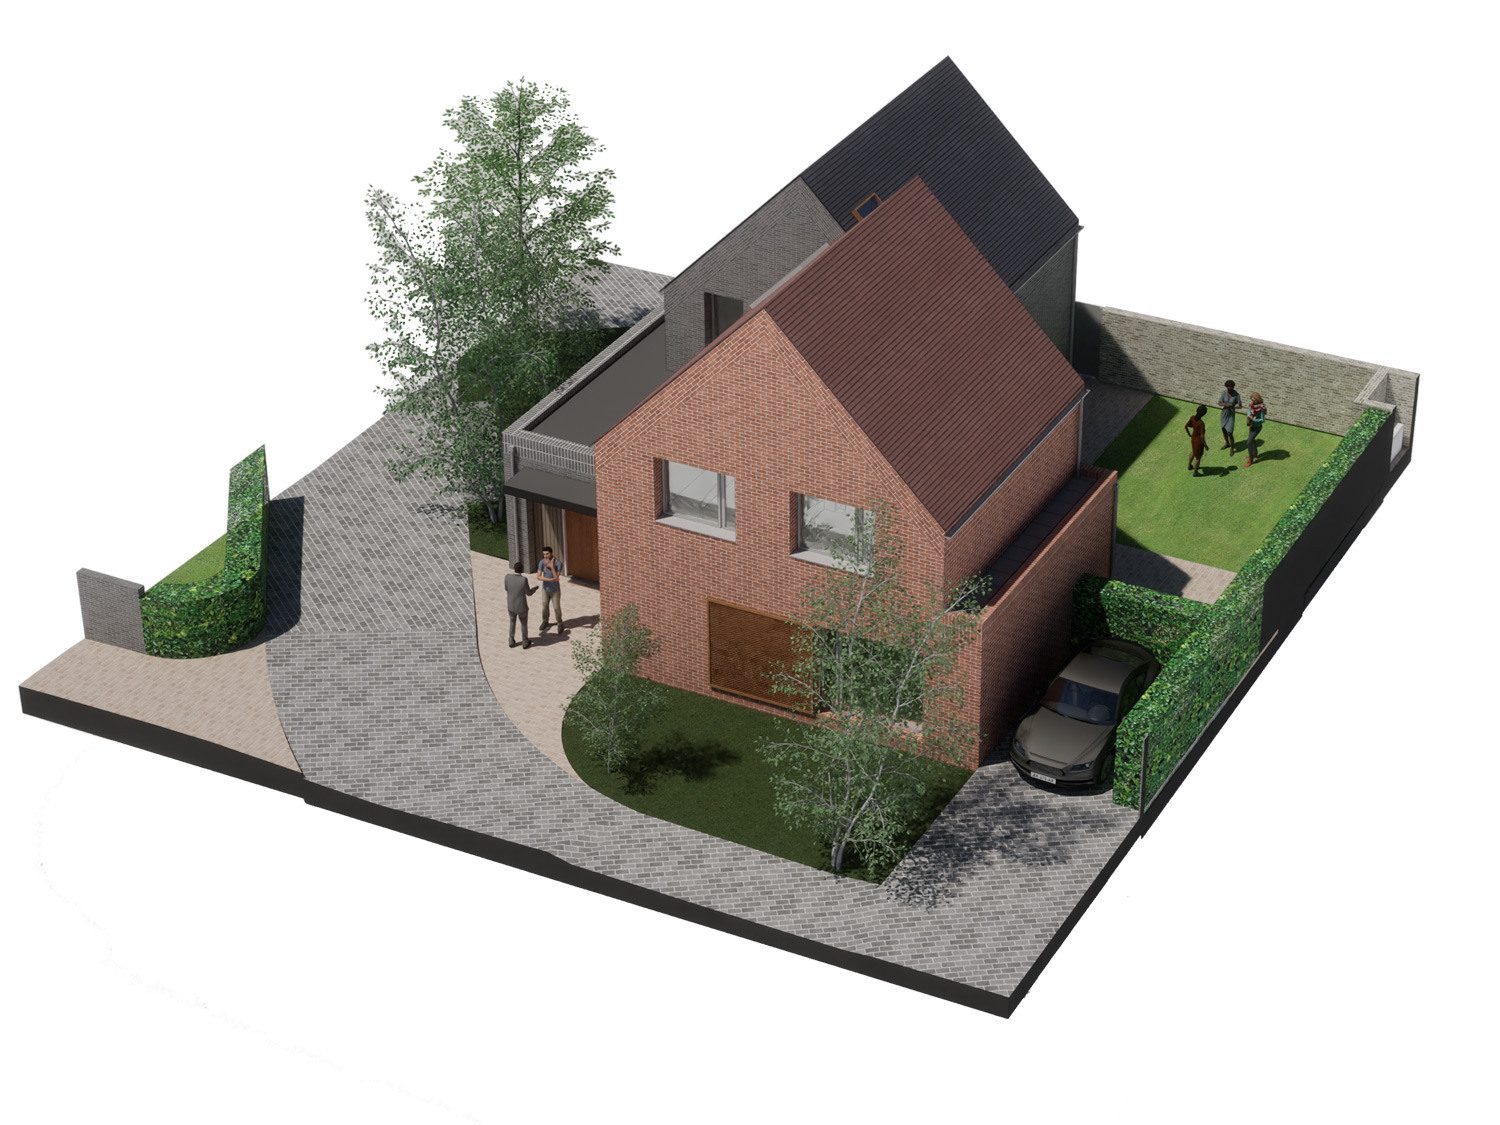 3d rendering of a typical 4 bed house as designed for the Woodland Villas site, by CDC studios